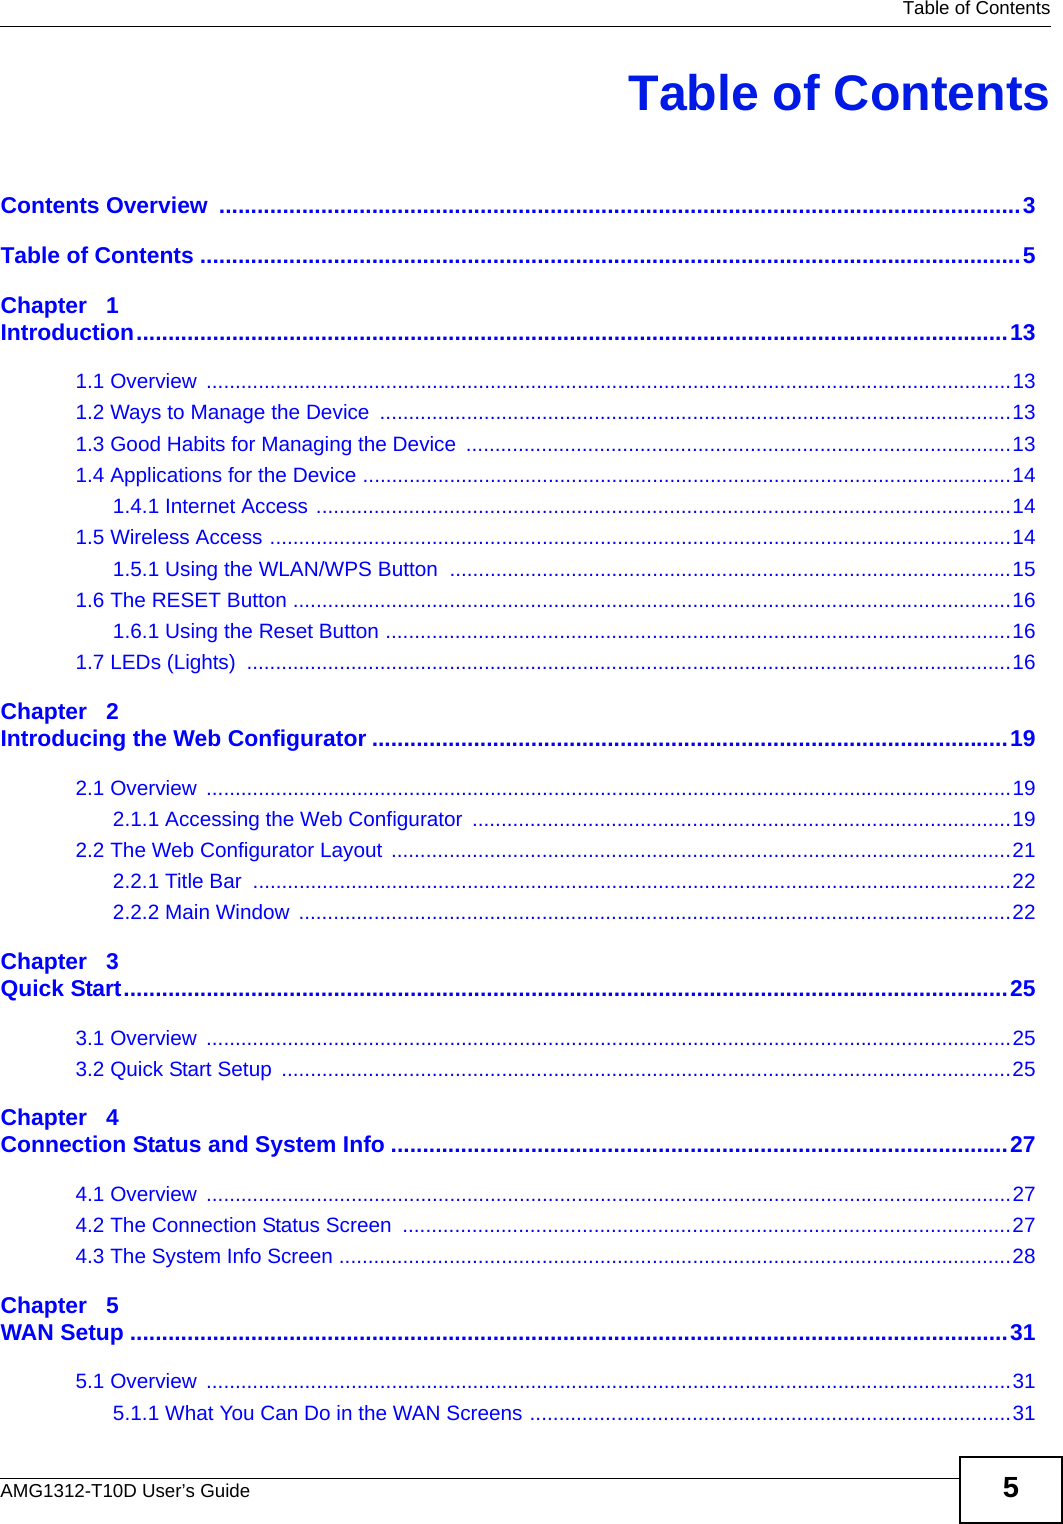   Table of ContentsAMG1312-T10D User’s Guide 5Table of ContentsContents Overview  ..............................................................................................................................3Table of Contents .................................................................................................................................5Chapter   1Introduction.........................................................................................................................................131.1 Overview  ...........................................................................................................................................131.2 Ways to Manage the Device  .............................................................................................................131.3 Good Habits for Managing the Device  ..............................................................................................131.4 Applications for the Device ................................................................................................................141.4.1 Internet Access ........................................................................................................................141.5 Wireless Access ................................................................................................................................141.5.1 Using the WLAN/WPS Button  .................................................................................................151.6 The RESET Button ............................................................................................................................161.6.1 Using the Reset Button ............................................................................................................161.7 LEDs (Lights)  ....................................................................................................................................16Chapter   2Introducing the Web Configurator ....................................................................................................192.1 Overview  ...........................................................................................................................................192.1.1 Accessing the Web Configurator  .............................................................................................192.2 The Web Configurator Layout ...........................................................................................................212.2.1 Title Bar  ...................................................................................................................................222.2.2 Main Window  ...........................................................................................................................22Chapter   3Quick Start...........................................................................................................................................253.1 Overview  ...........................................................................................................................................253.2 Quick Start Setup  ..............................................................................................................................25Chapter   4Connection Status and System Info .................................................................................................274.1 Overview  ...........................................................................................................................................274.2 The Connection Status Screen  .........................................................................................................274.3 The System Info Screen ....................................................................................................................28Chapter   5WAN Setup ..........................................................................................................................................315.1 Overview  ...........................................................................................................................................315.1.1 What You Can Do in the WAN Screens ...................................................................................31